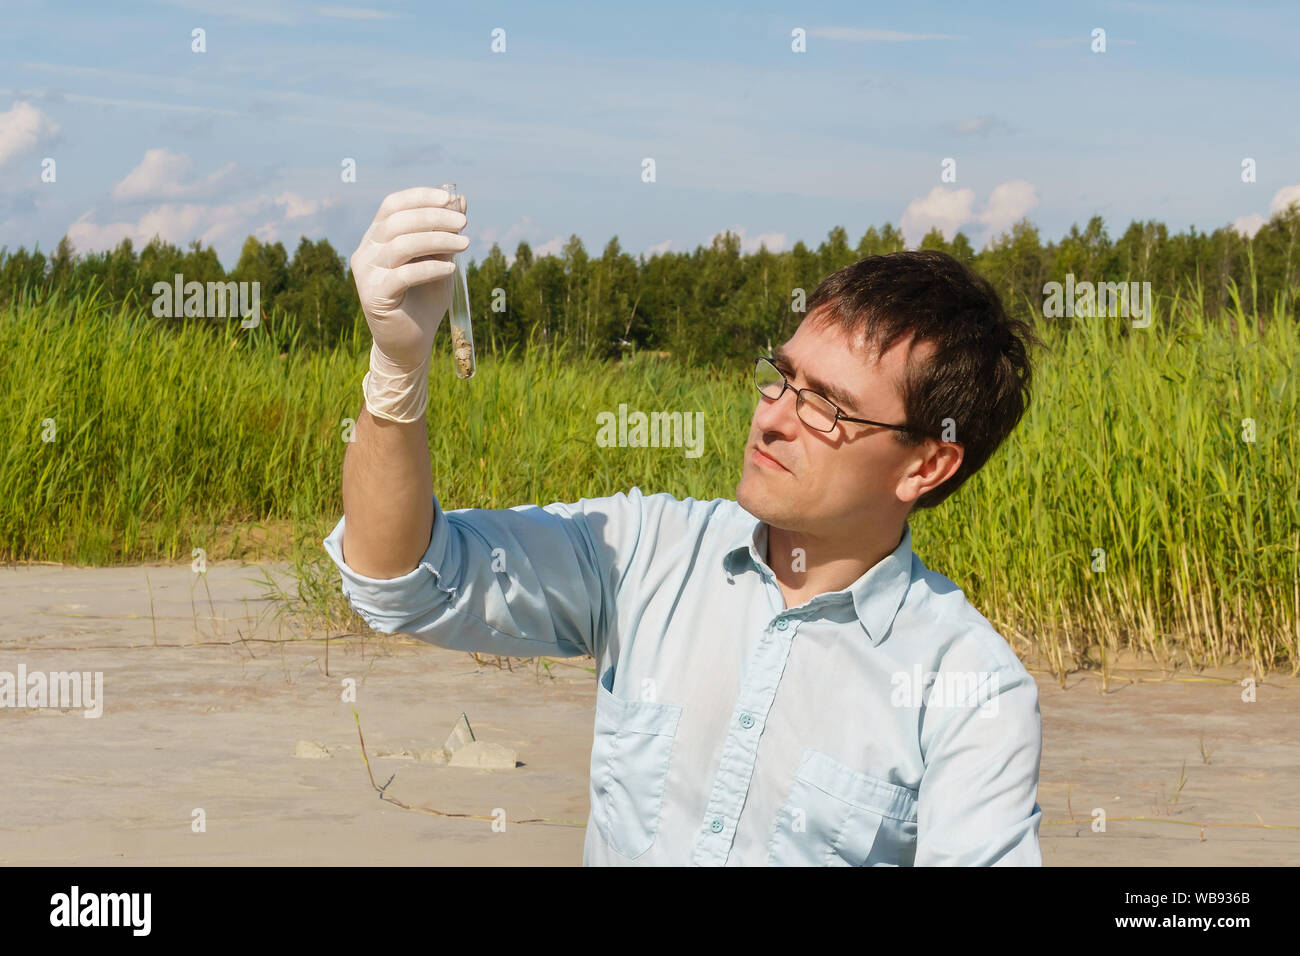 man ecologist or biologist examines a sample of soil in a test tube against a dry marsh Stock Photo